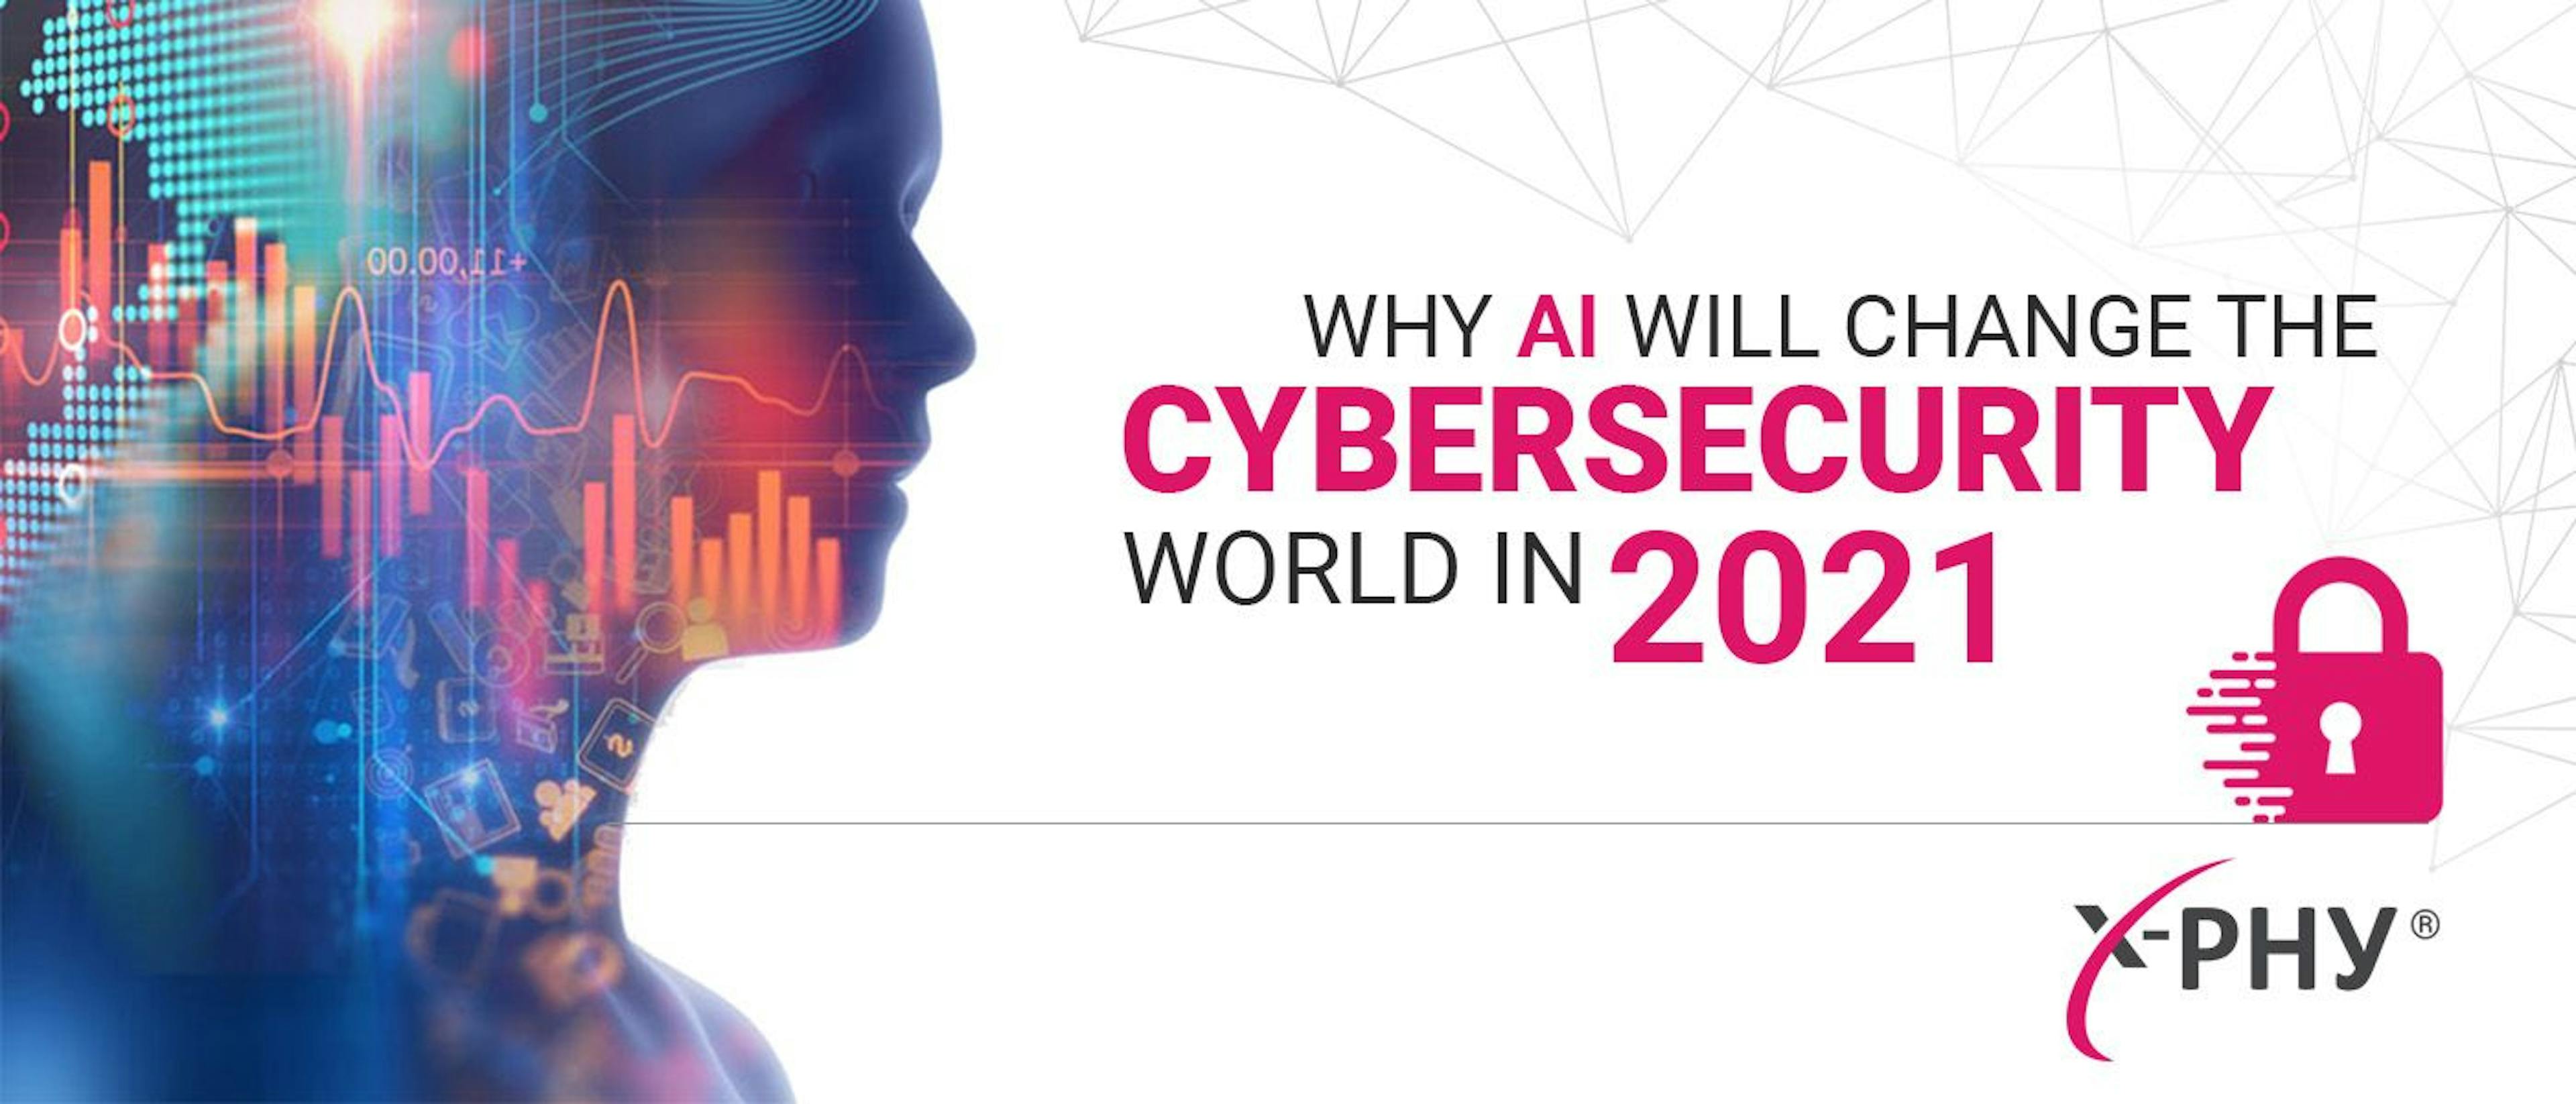 /ai-will-reshape-the-cybersecurity-world-in-2021-s7p3661 feature image